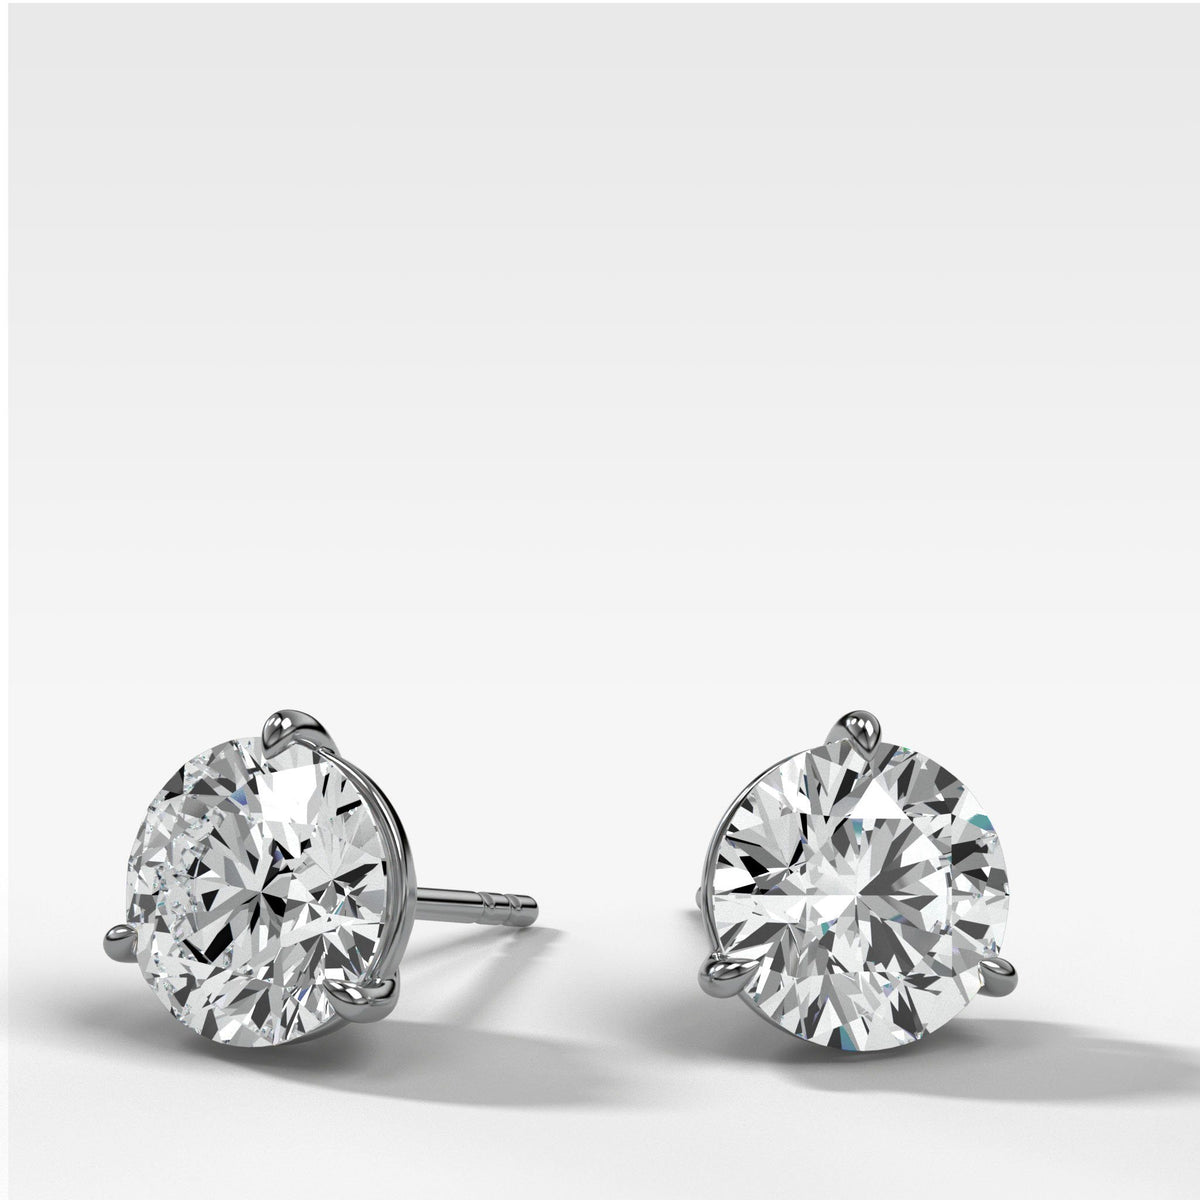 Round Cut Single Point Prong Stud Earrings by Good Stone in White Gold